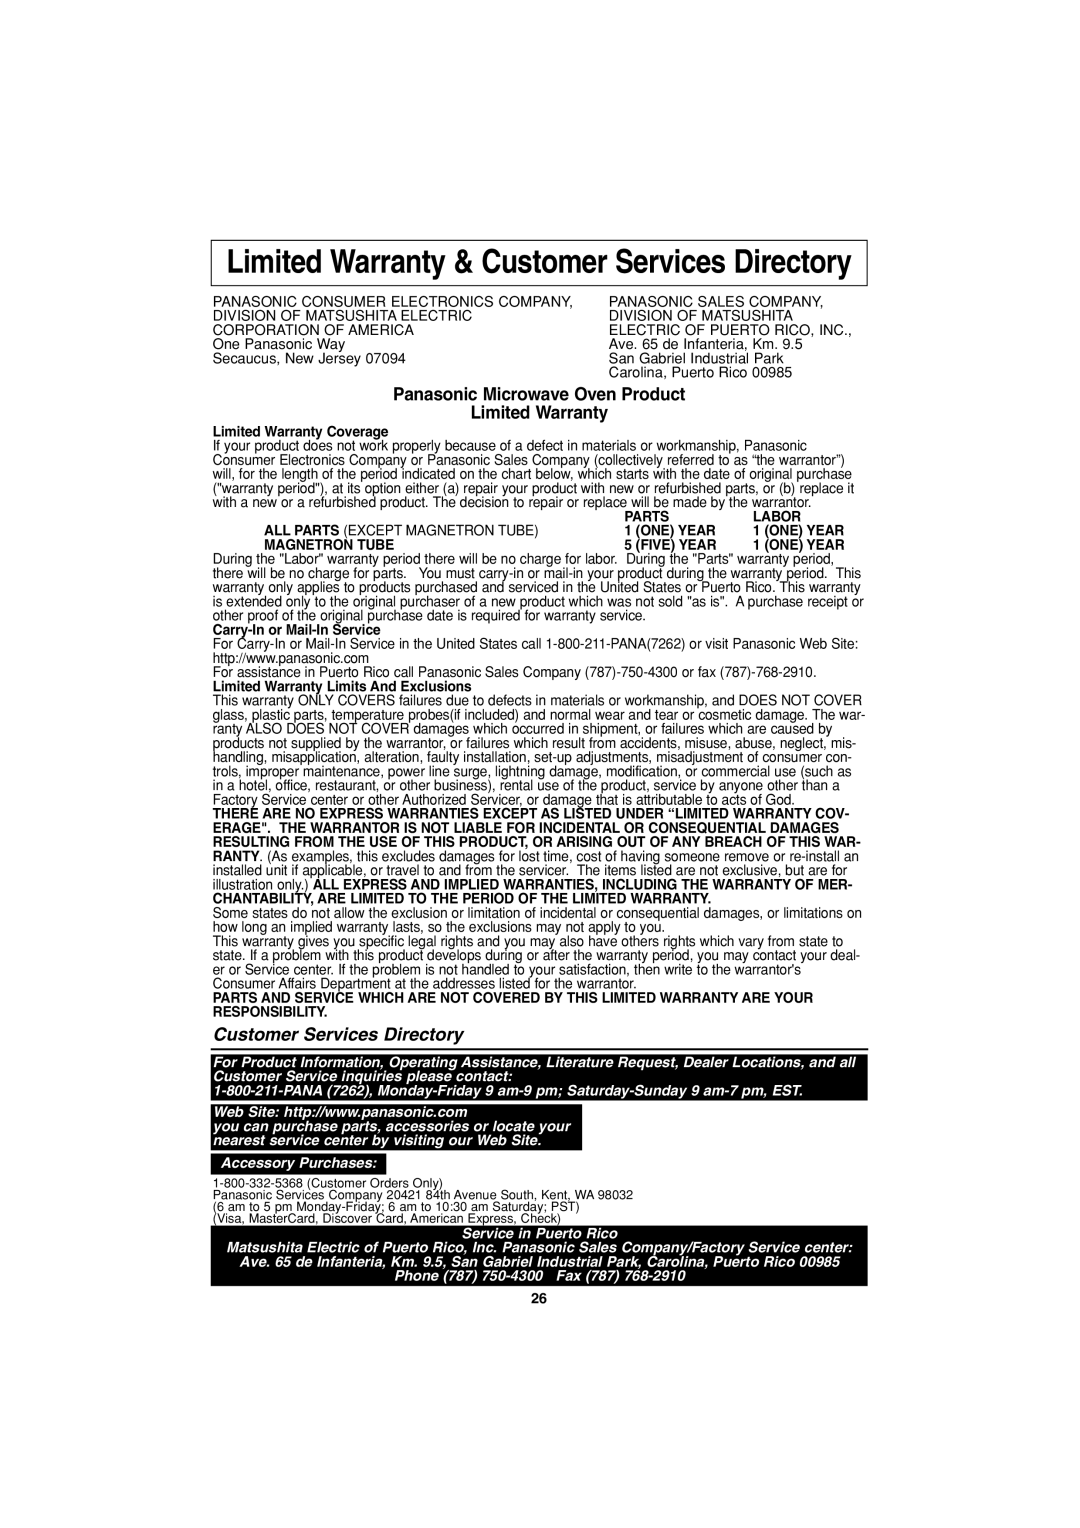 Panasonic NN-S943, NN-S743 Limited Warranty & Customer Services Directory, Accessory Purchases, Service in Puerto Rico 